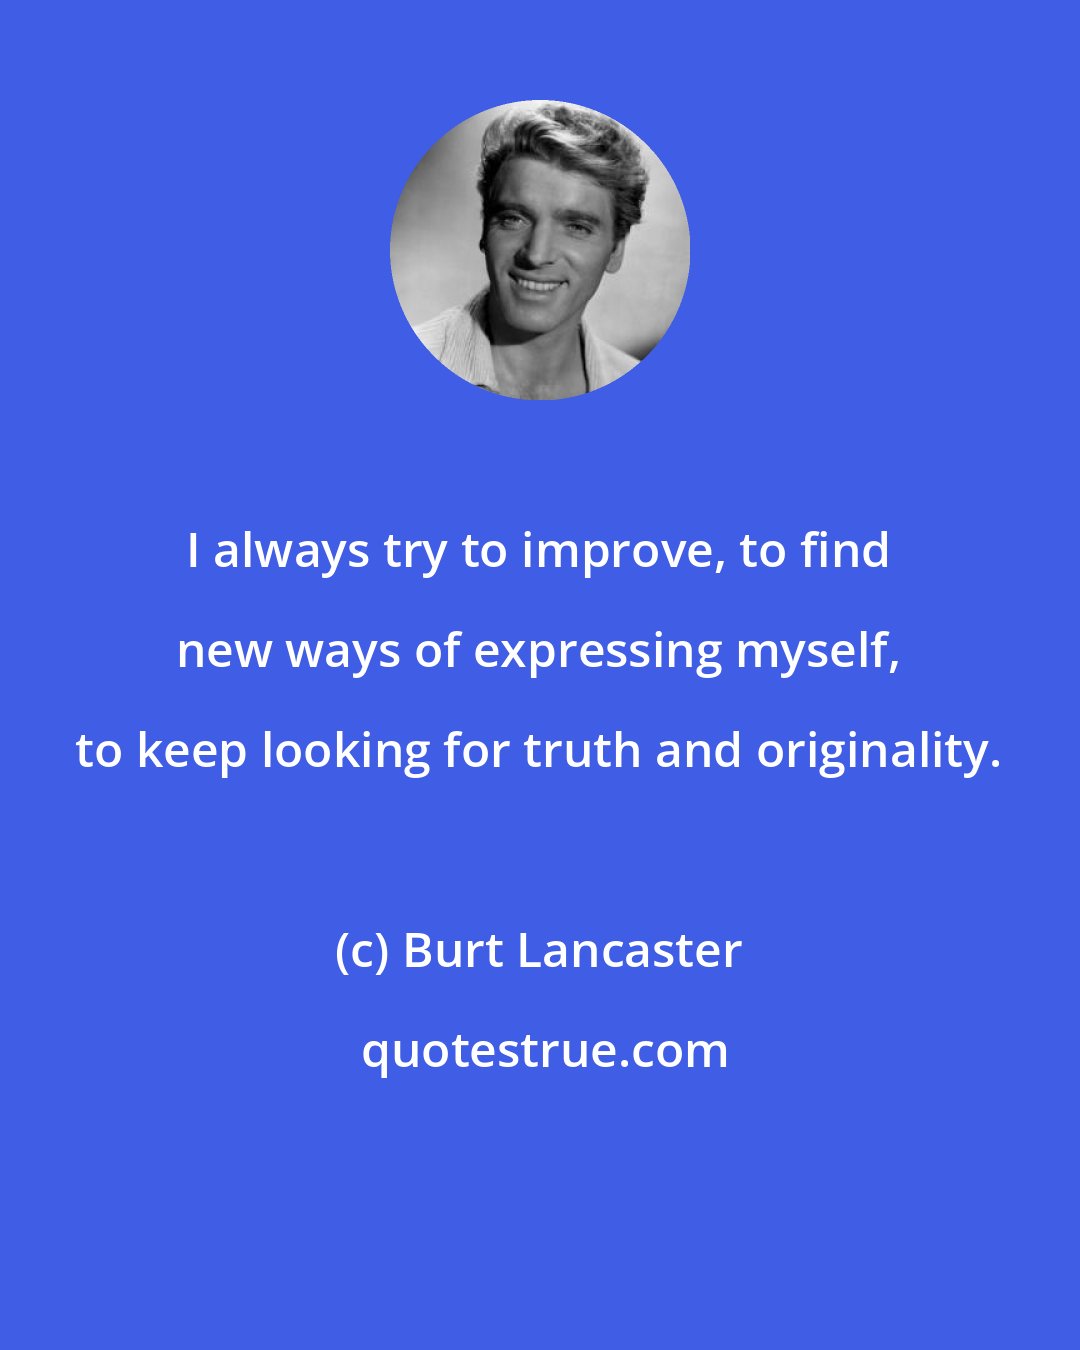 Burt Lancaster: I always try to improve, to find new ways of expressing myself, to keep looking for truth and originality.